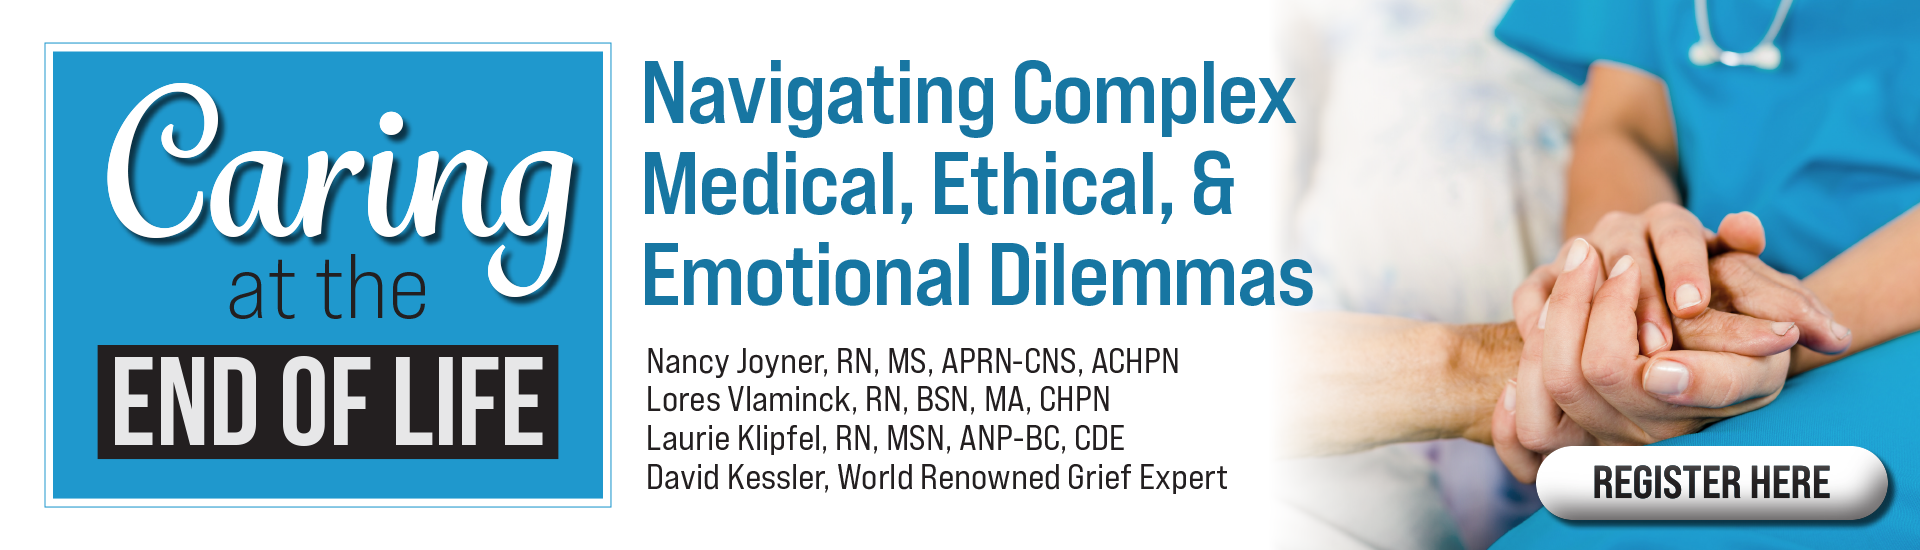 Caring at the End of Life: Navigating Complex Medical, Ethical, & Emotional Dilemmas